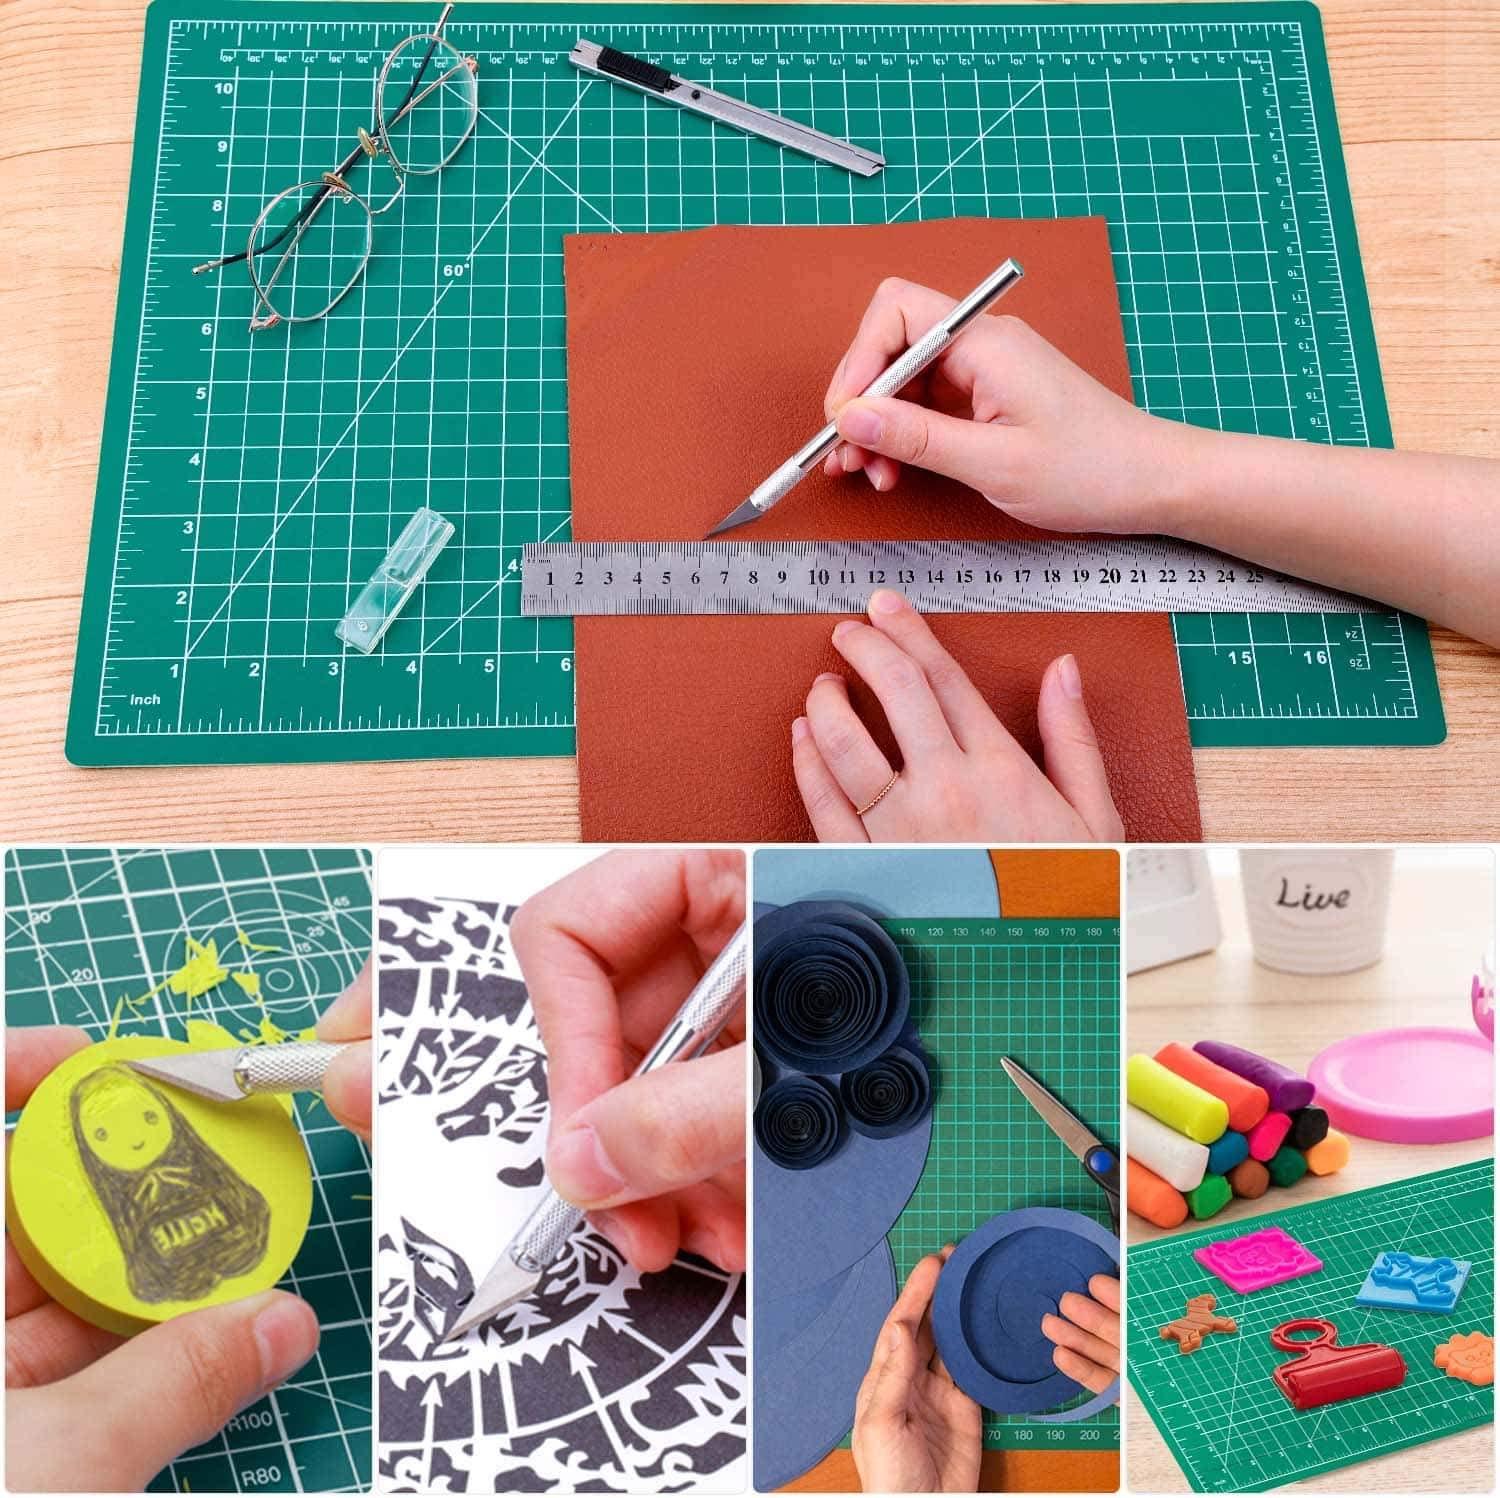 TEHAUX Backing Plate Cutting Mats for Crafts Rotating Cutting Mats for  Quilting Art Cutting Mat Quilting Cutting Mats Art Mat X Tool Pro Tools  Crafts